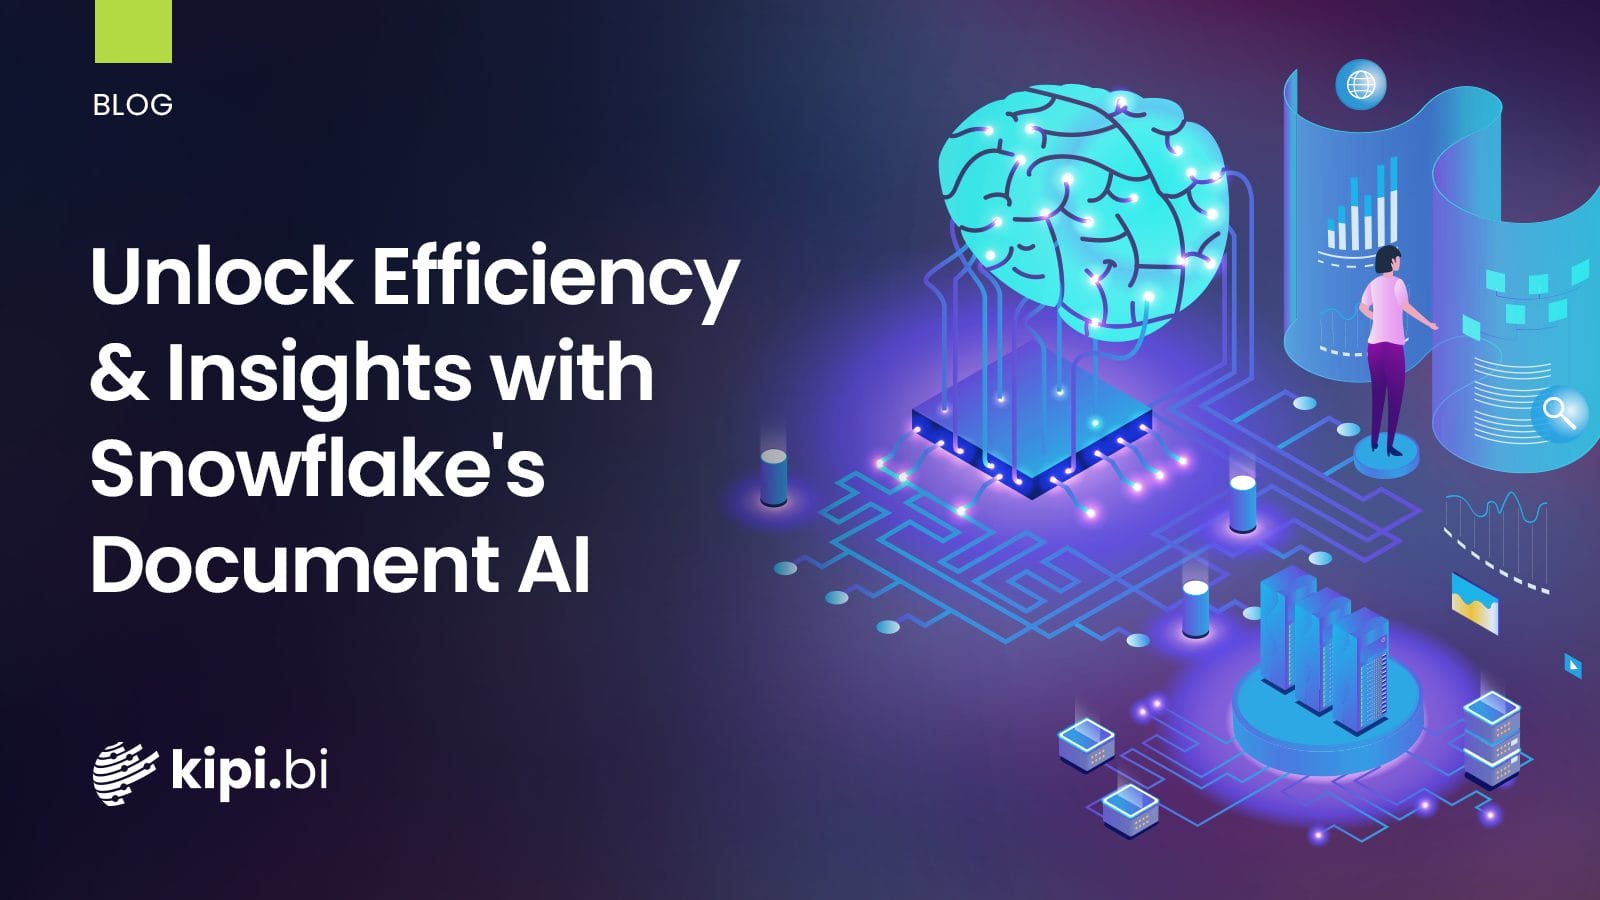 Unlock Efficiency and Insights with Snowflake’s Document AI